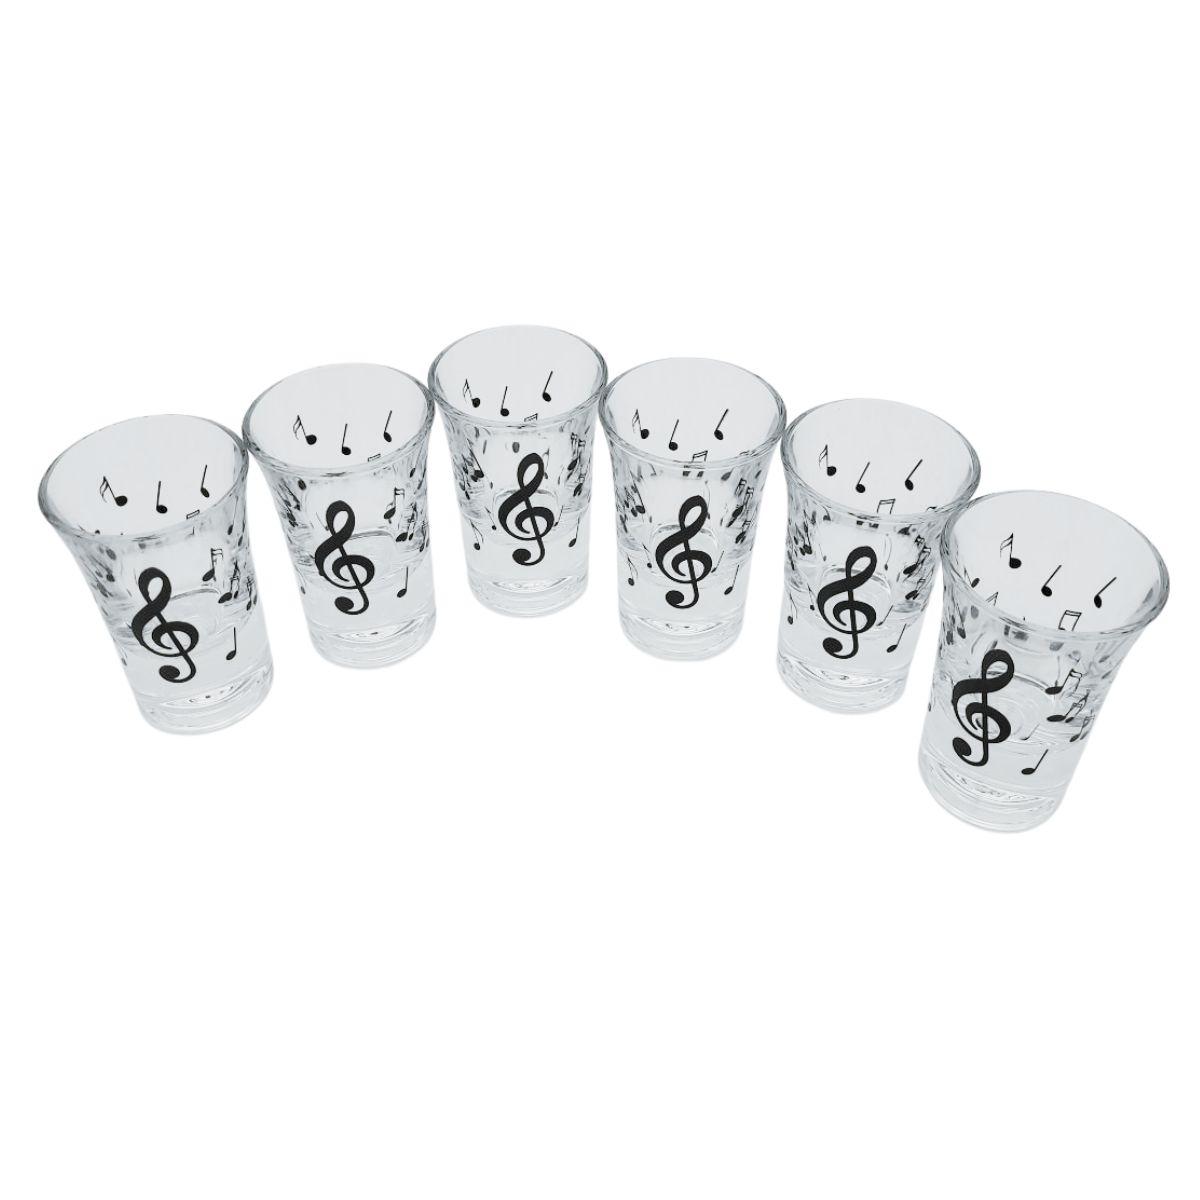 Set of 6 shot glasses with black treble clef and notes